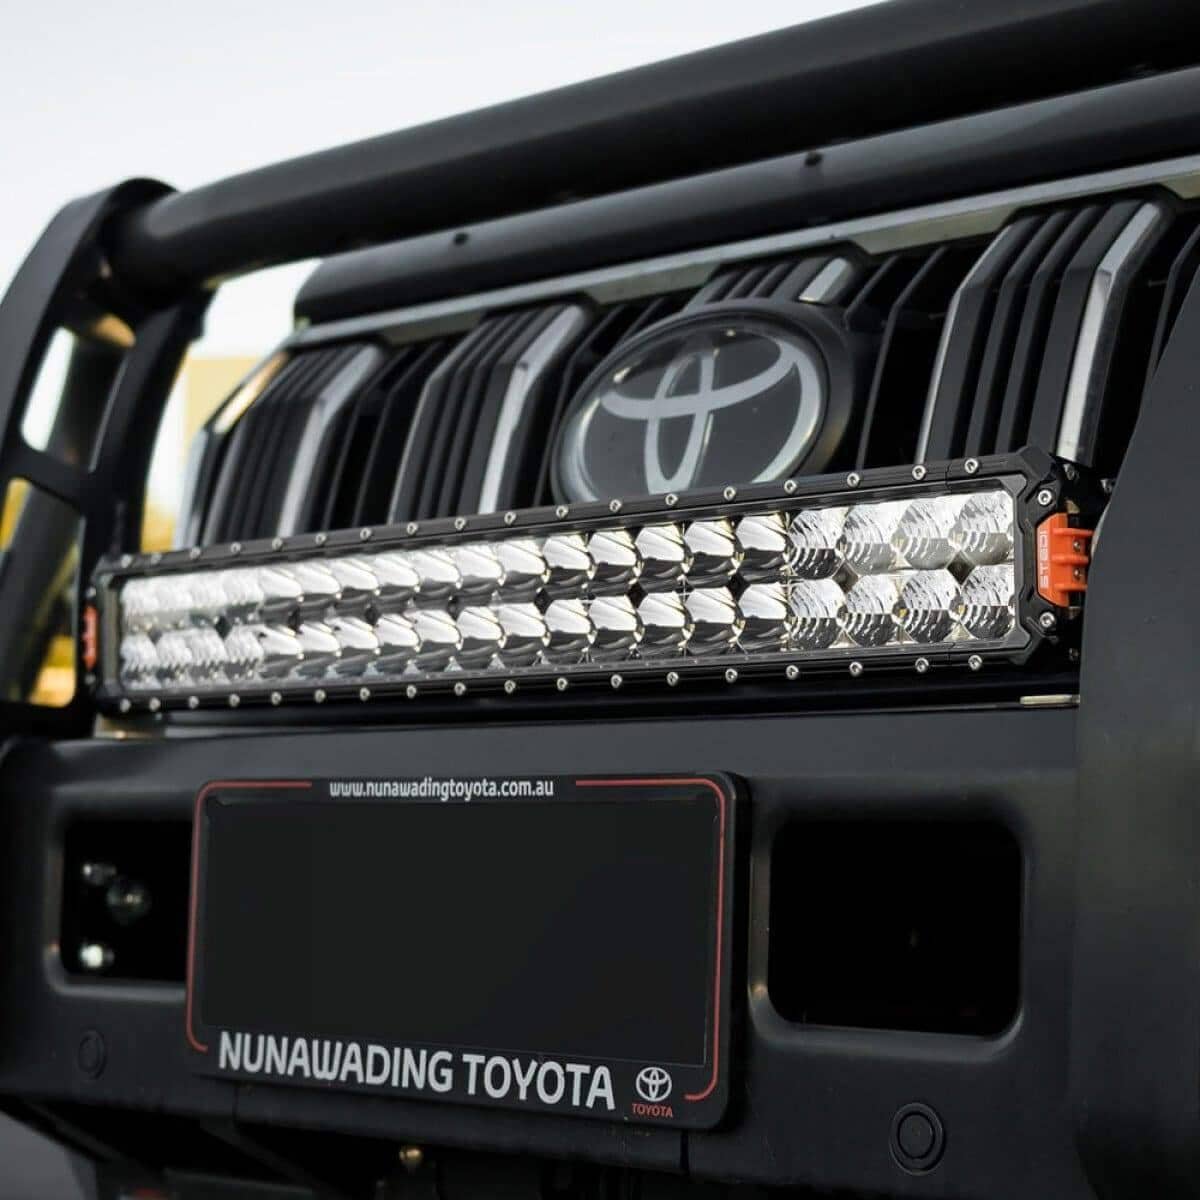 STEDI ST3303 PRO 28.2 inch Double Row Ultra High Output LED Bar - NZ Offroader